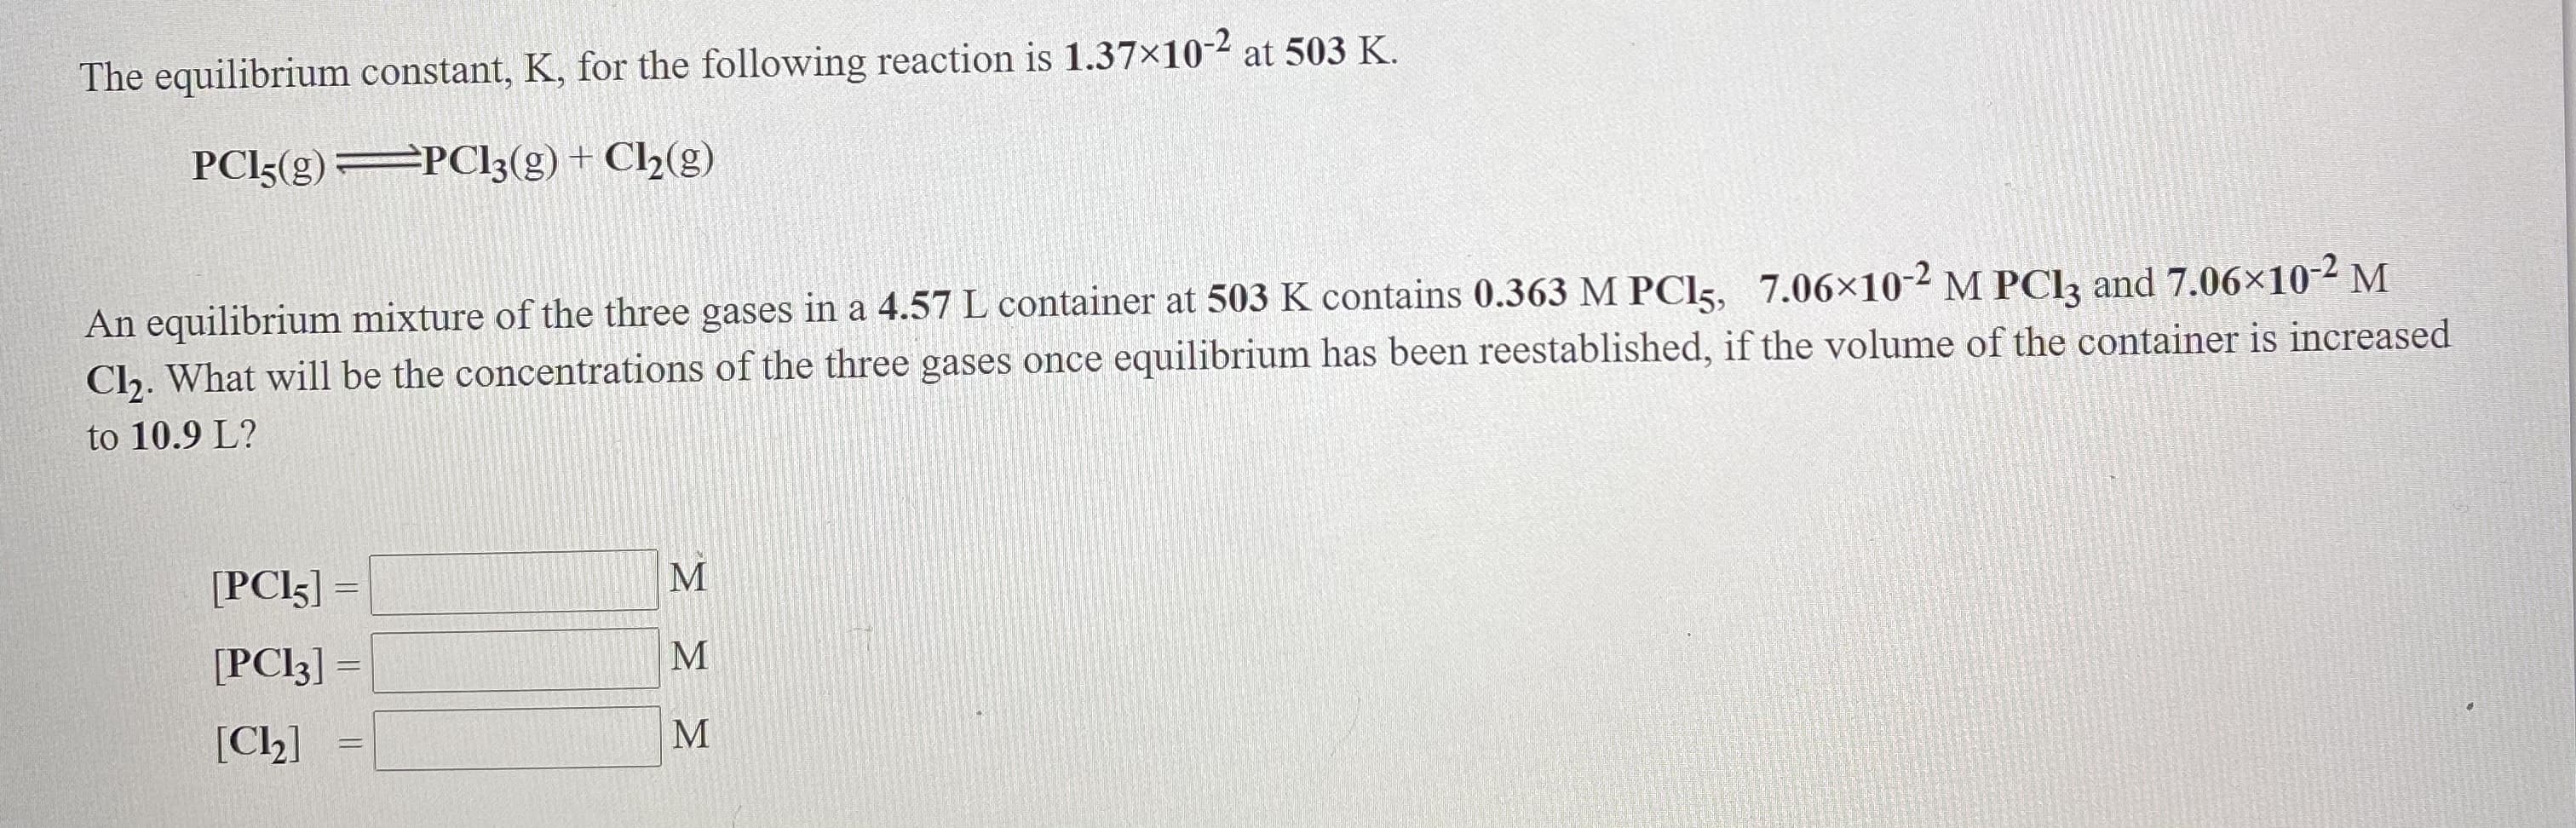 The equilibrium constant, K, for the following reaction is 1.37×10-² at 503 R.
PCI5(g) PC13(g) + C2(g)
An equilibrium mixture of the three gases in a 4.57 L container at 503 K contains 0.363 M PCI5, 7.06×10-2 M PClą and 7.06×10-2 M
Clh. What will be the concentrations of the three gases once equilibrium has been reestablished, if the volume of the container is increased
to 10.9 L?
